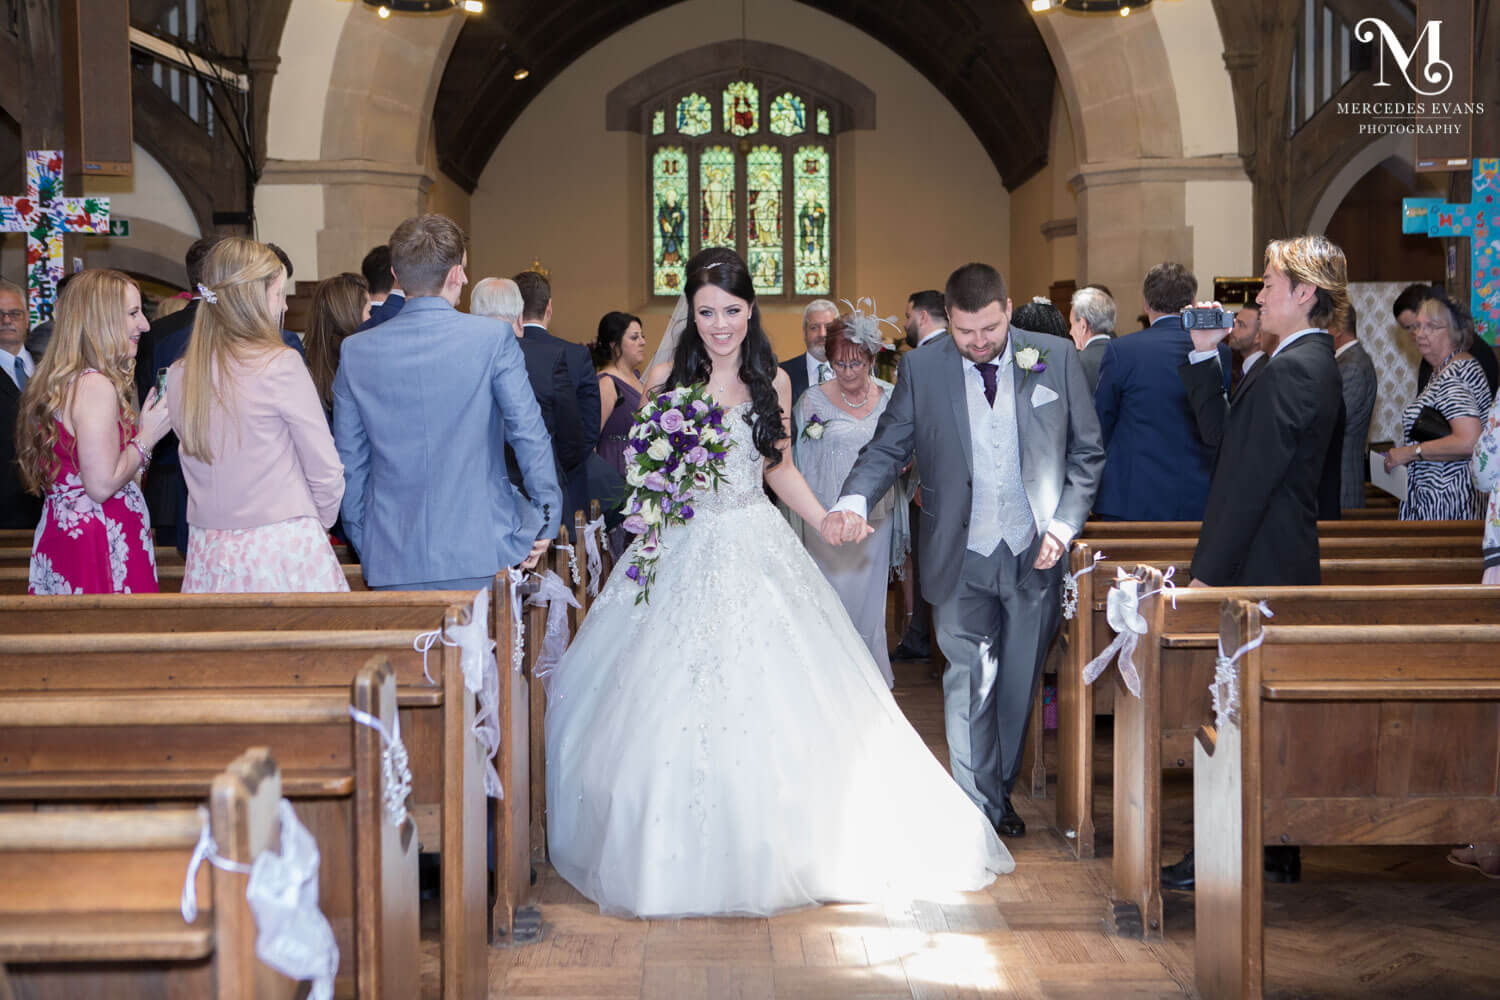 The bride and groom walk back down the aisle after their wedding ceremony at St Andrew's church in Frimley